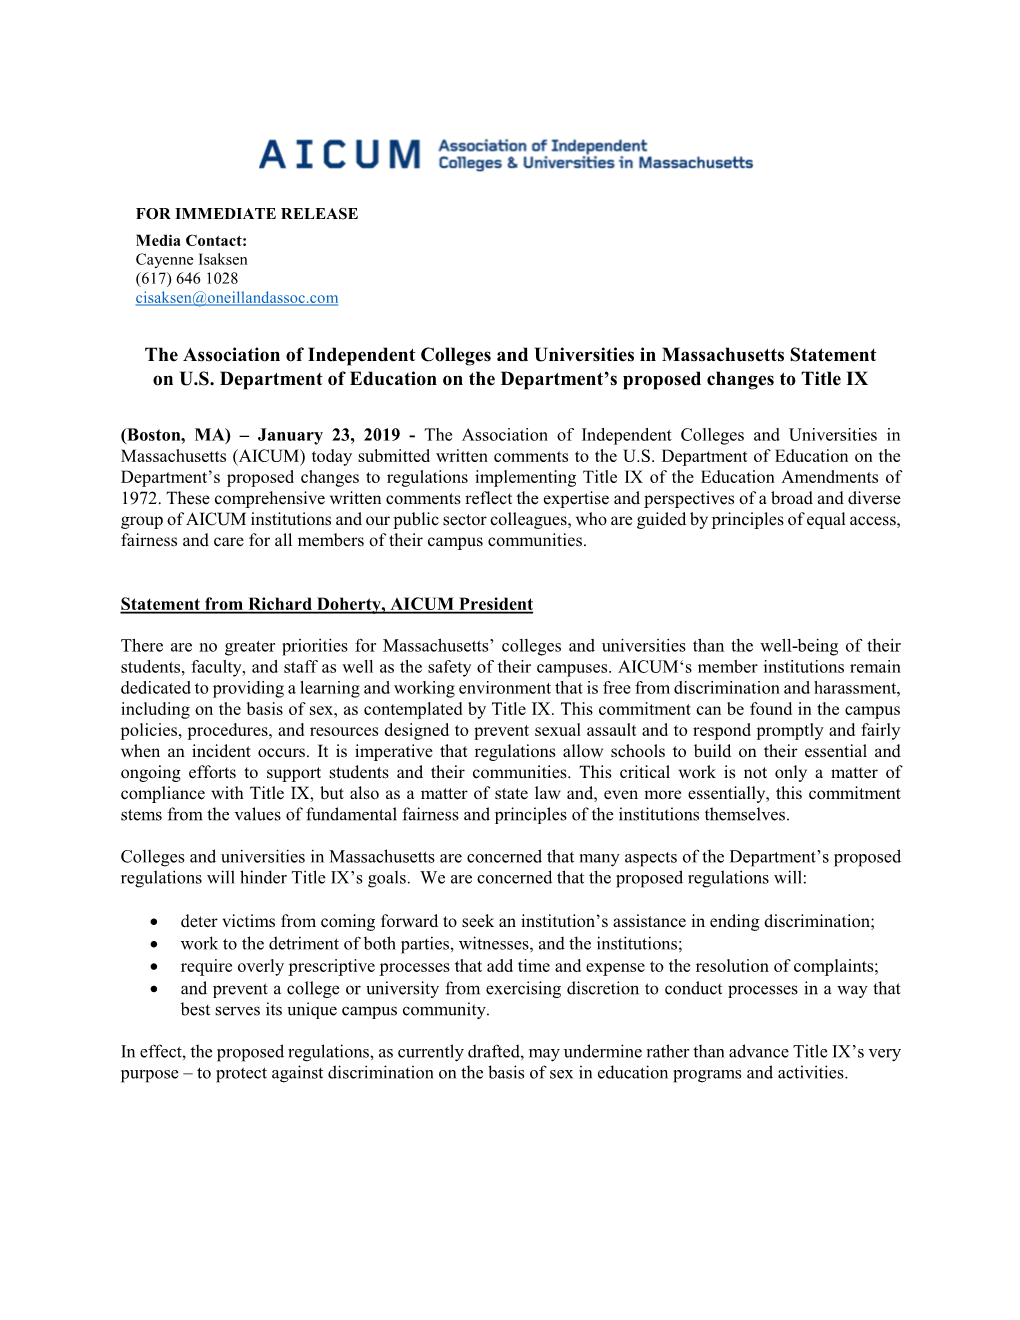 The Association of Independent Colleges and Universities in Massachusetts Statement on U.S